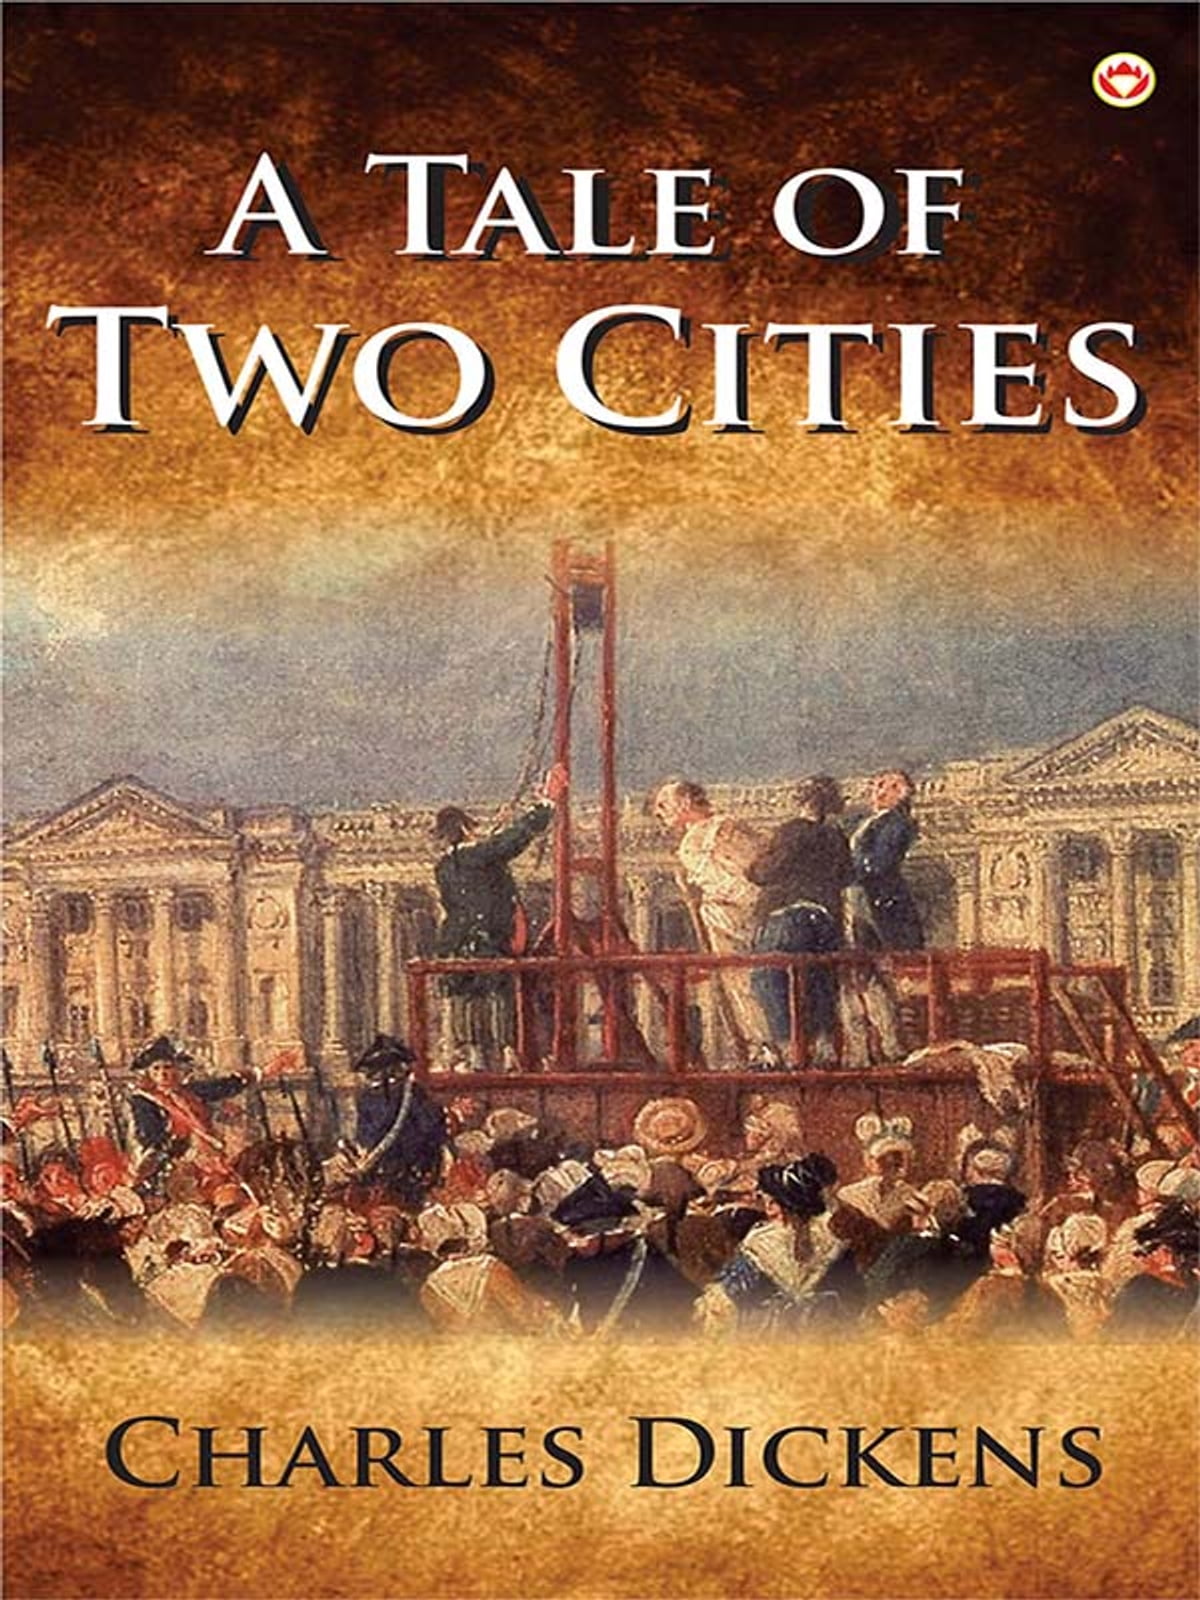 A great historical book - A Tale of Two Cities audiobook 